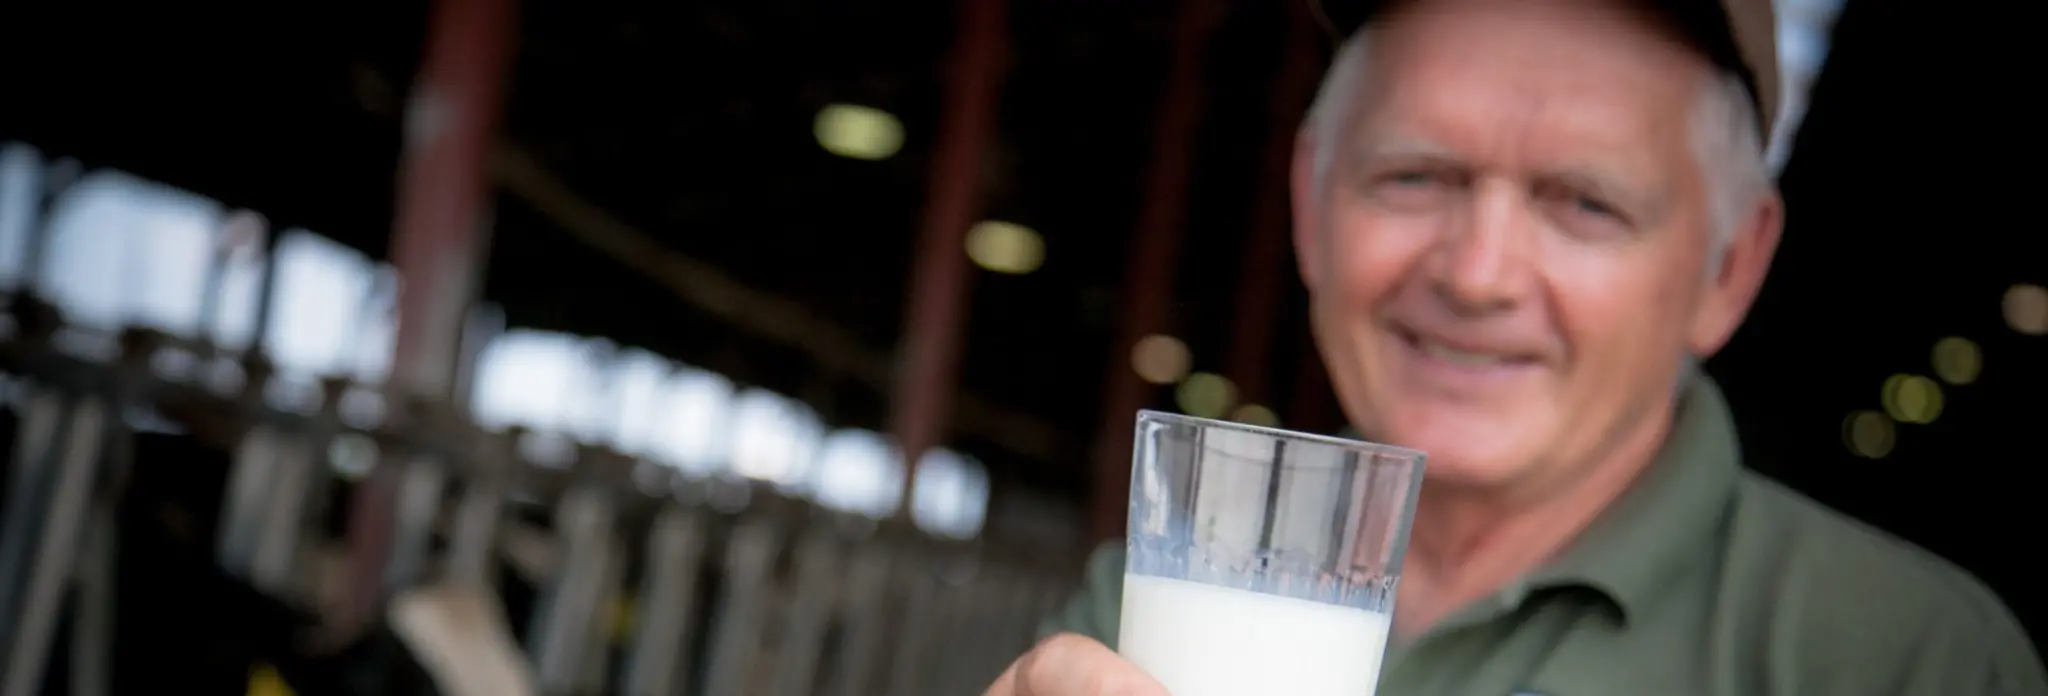 A man holds a glass of milk.